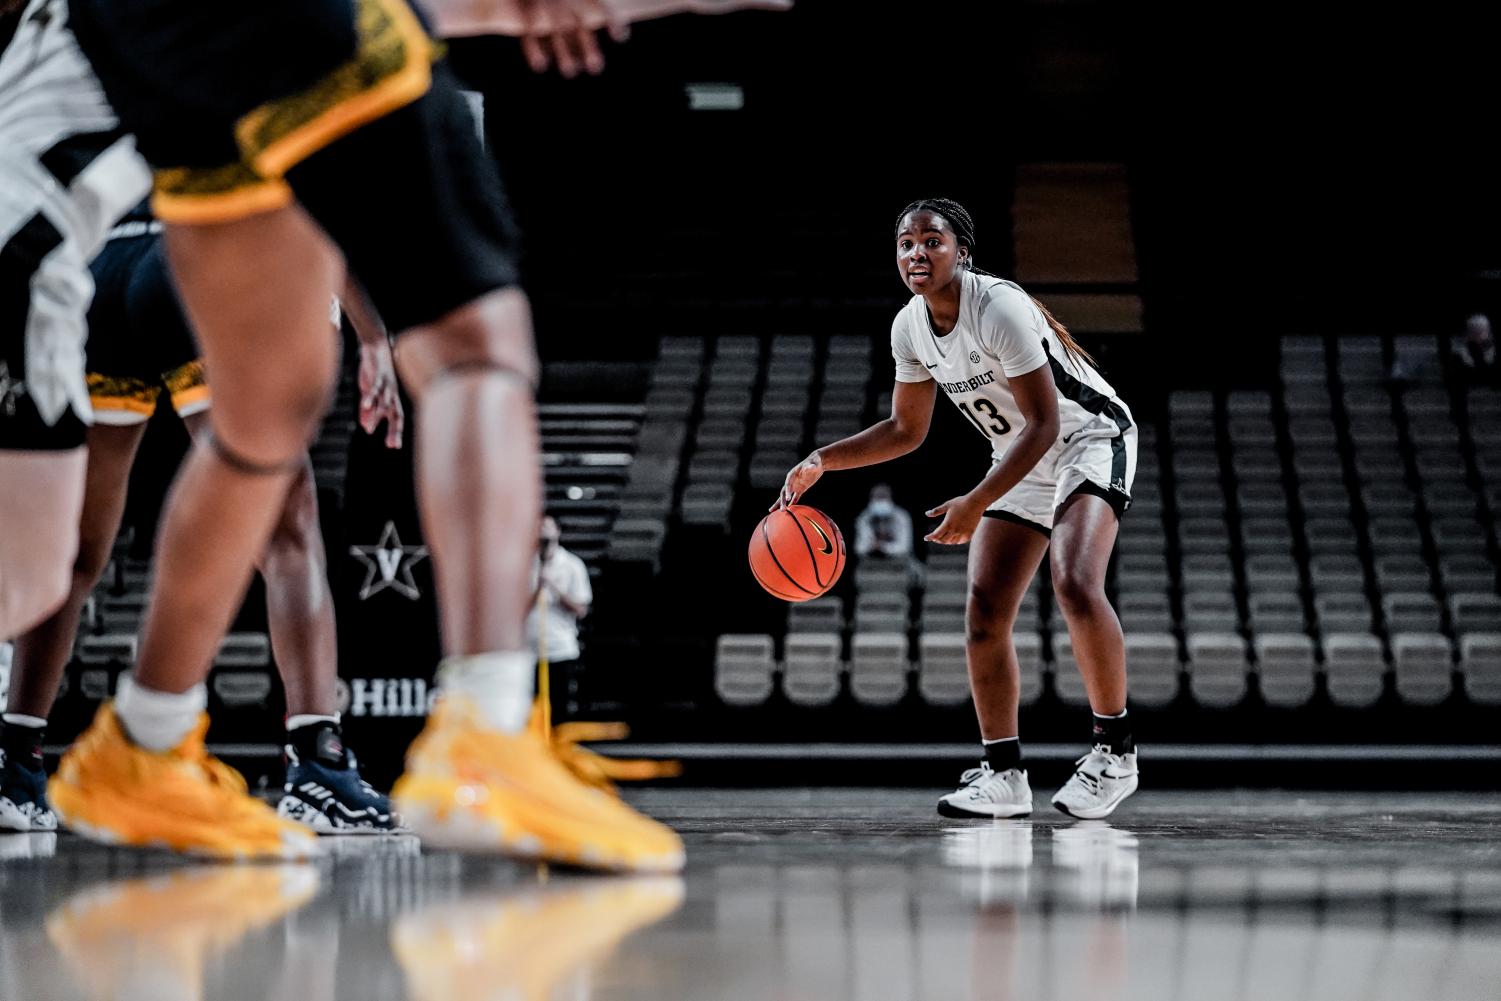 Vanderbilt guard DeMauri Flournoy dribbling up top in a game early in the 2021-22 season.